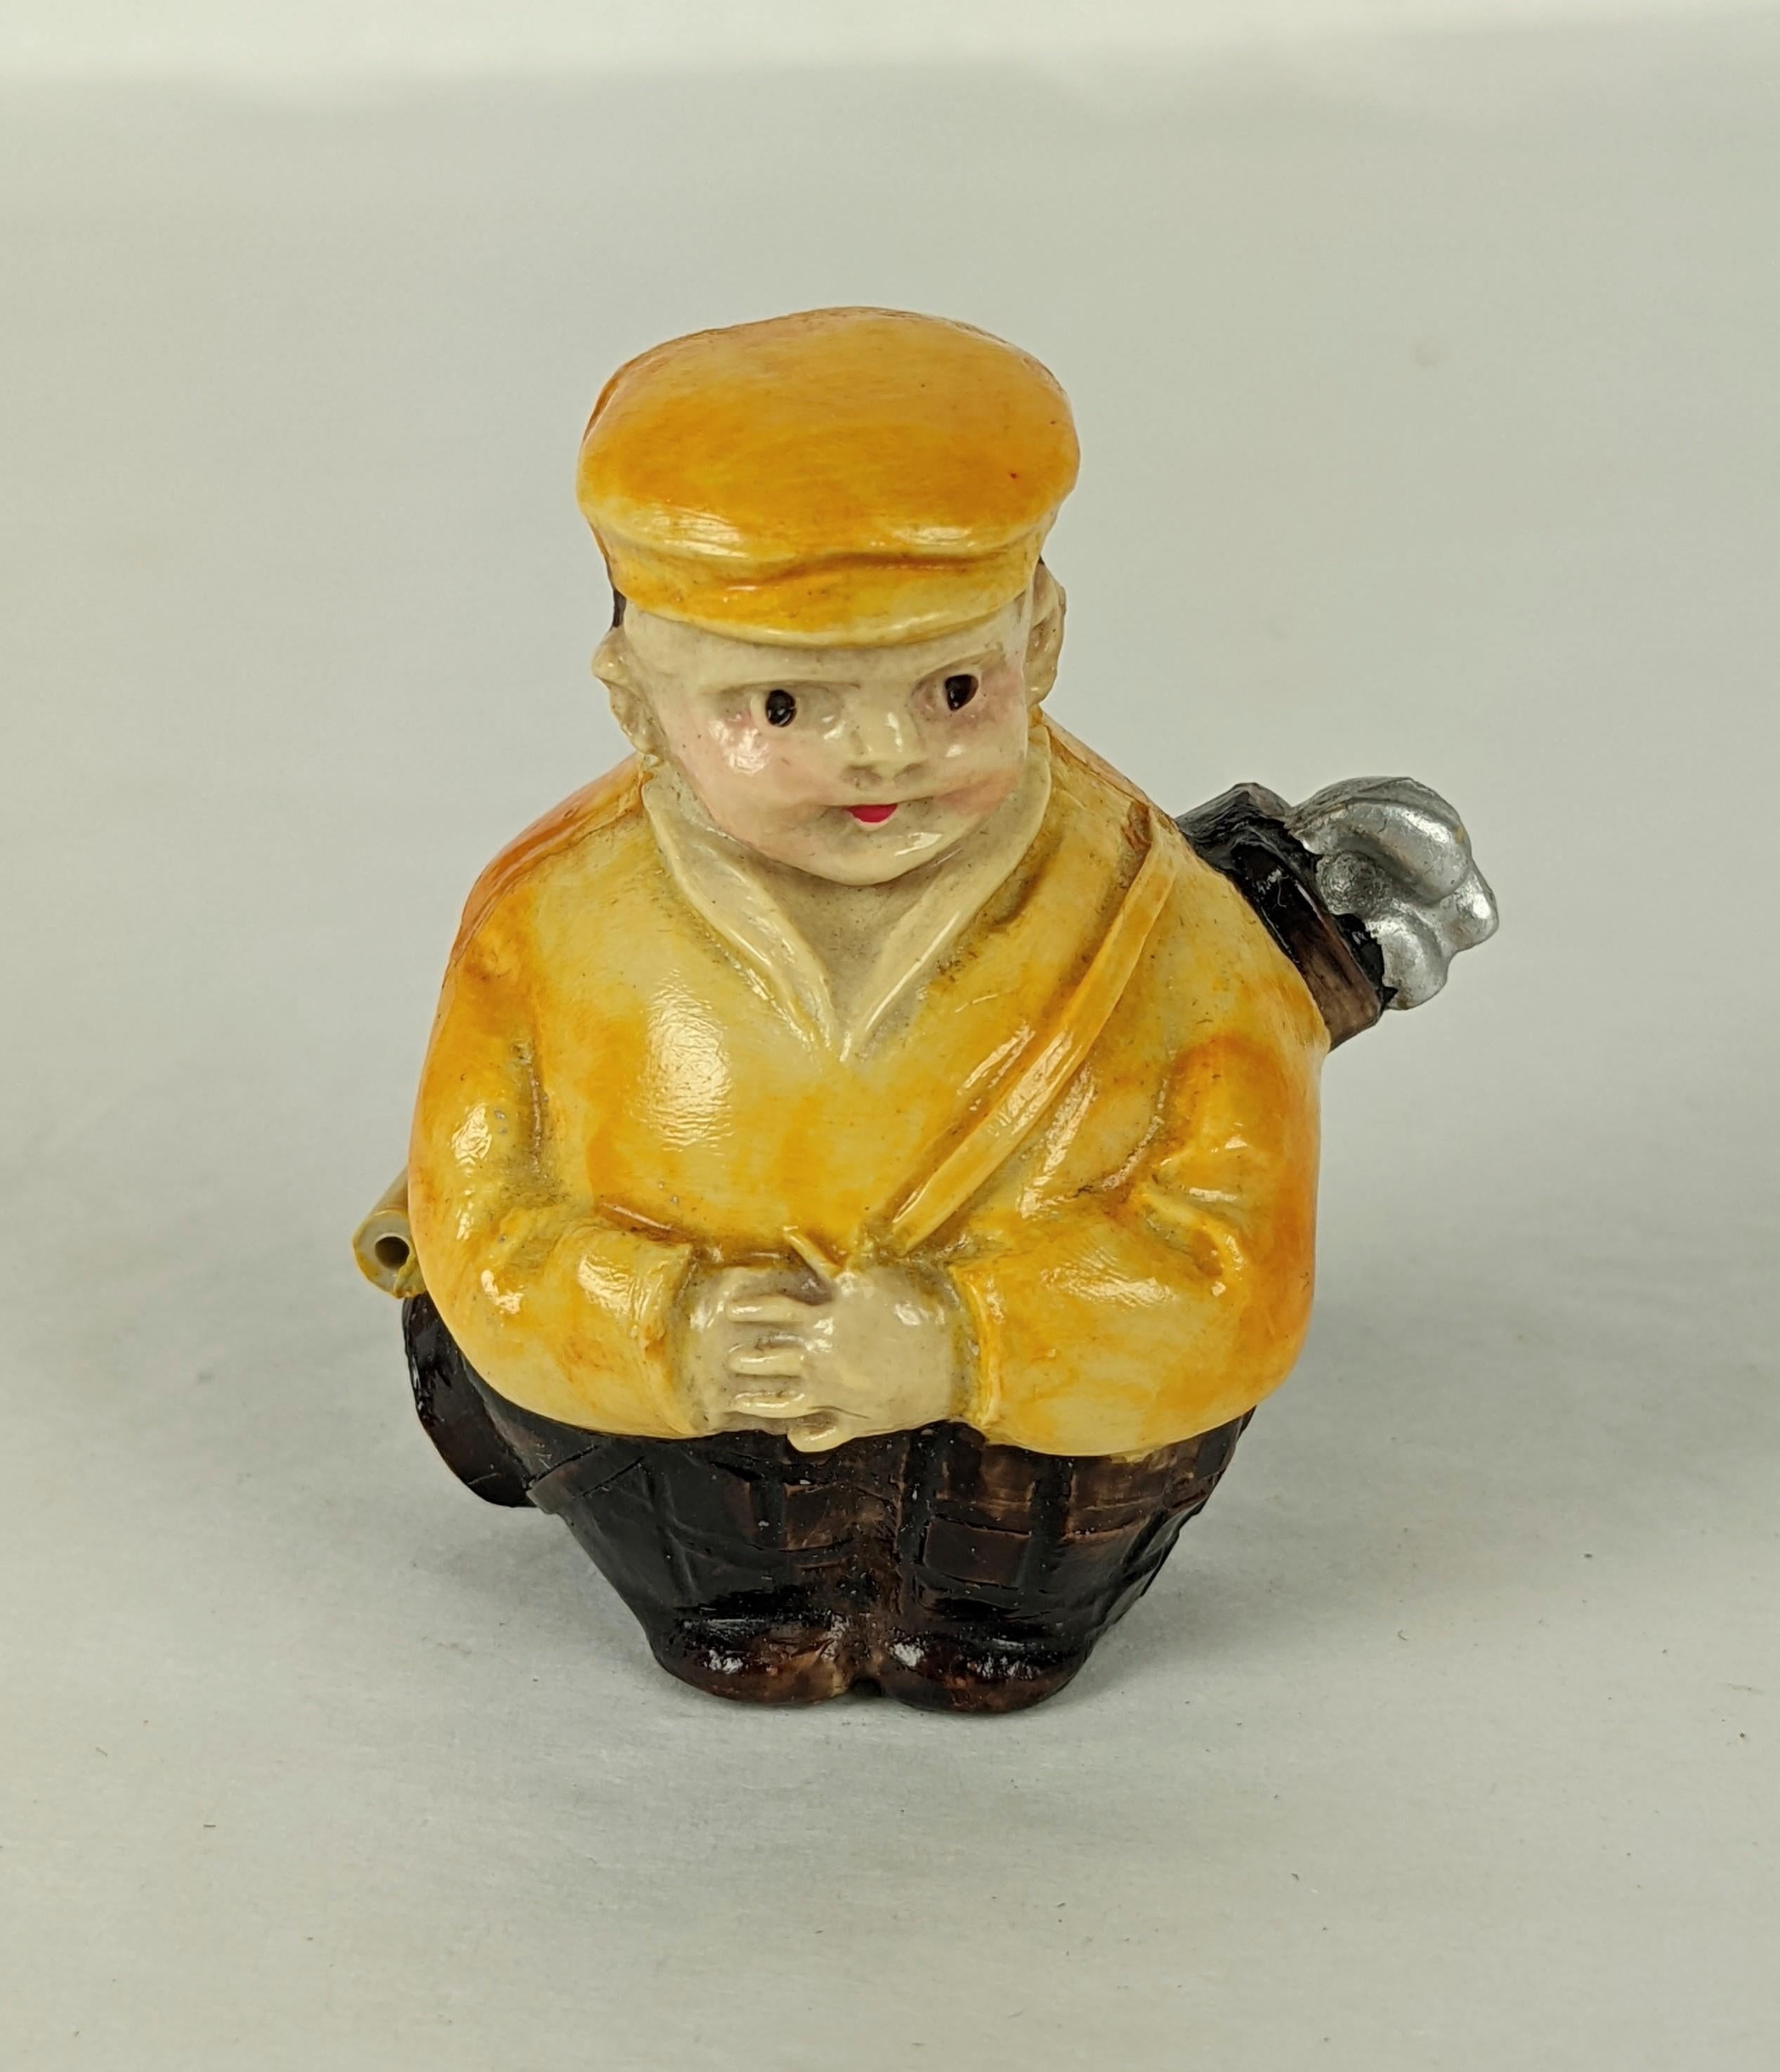 Collectible Art Deco Celluloid Golfer Tape Measure from Germany circa 1930. Unusual figural motif with centimeter tape measure. 2